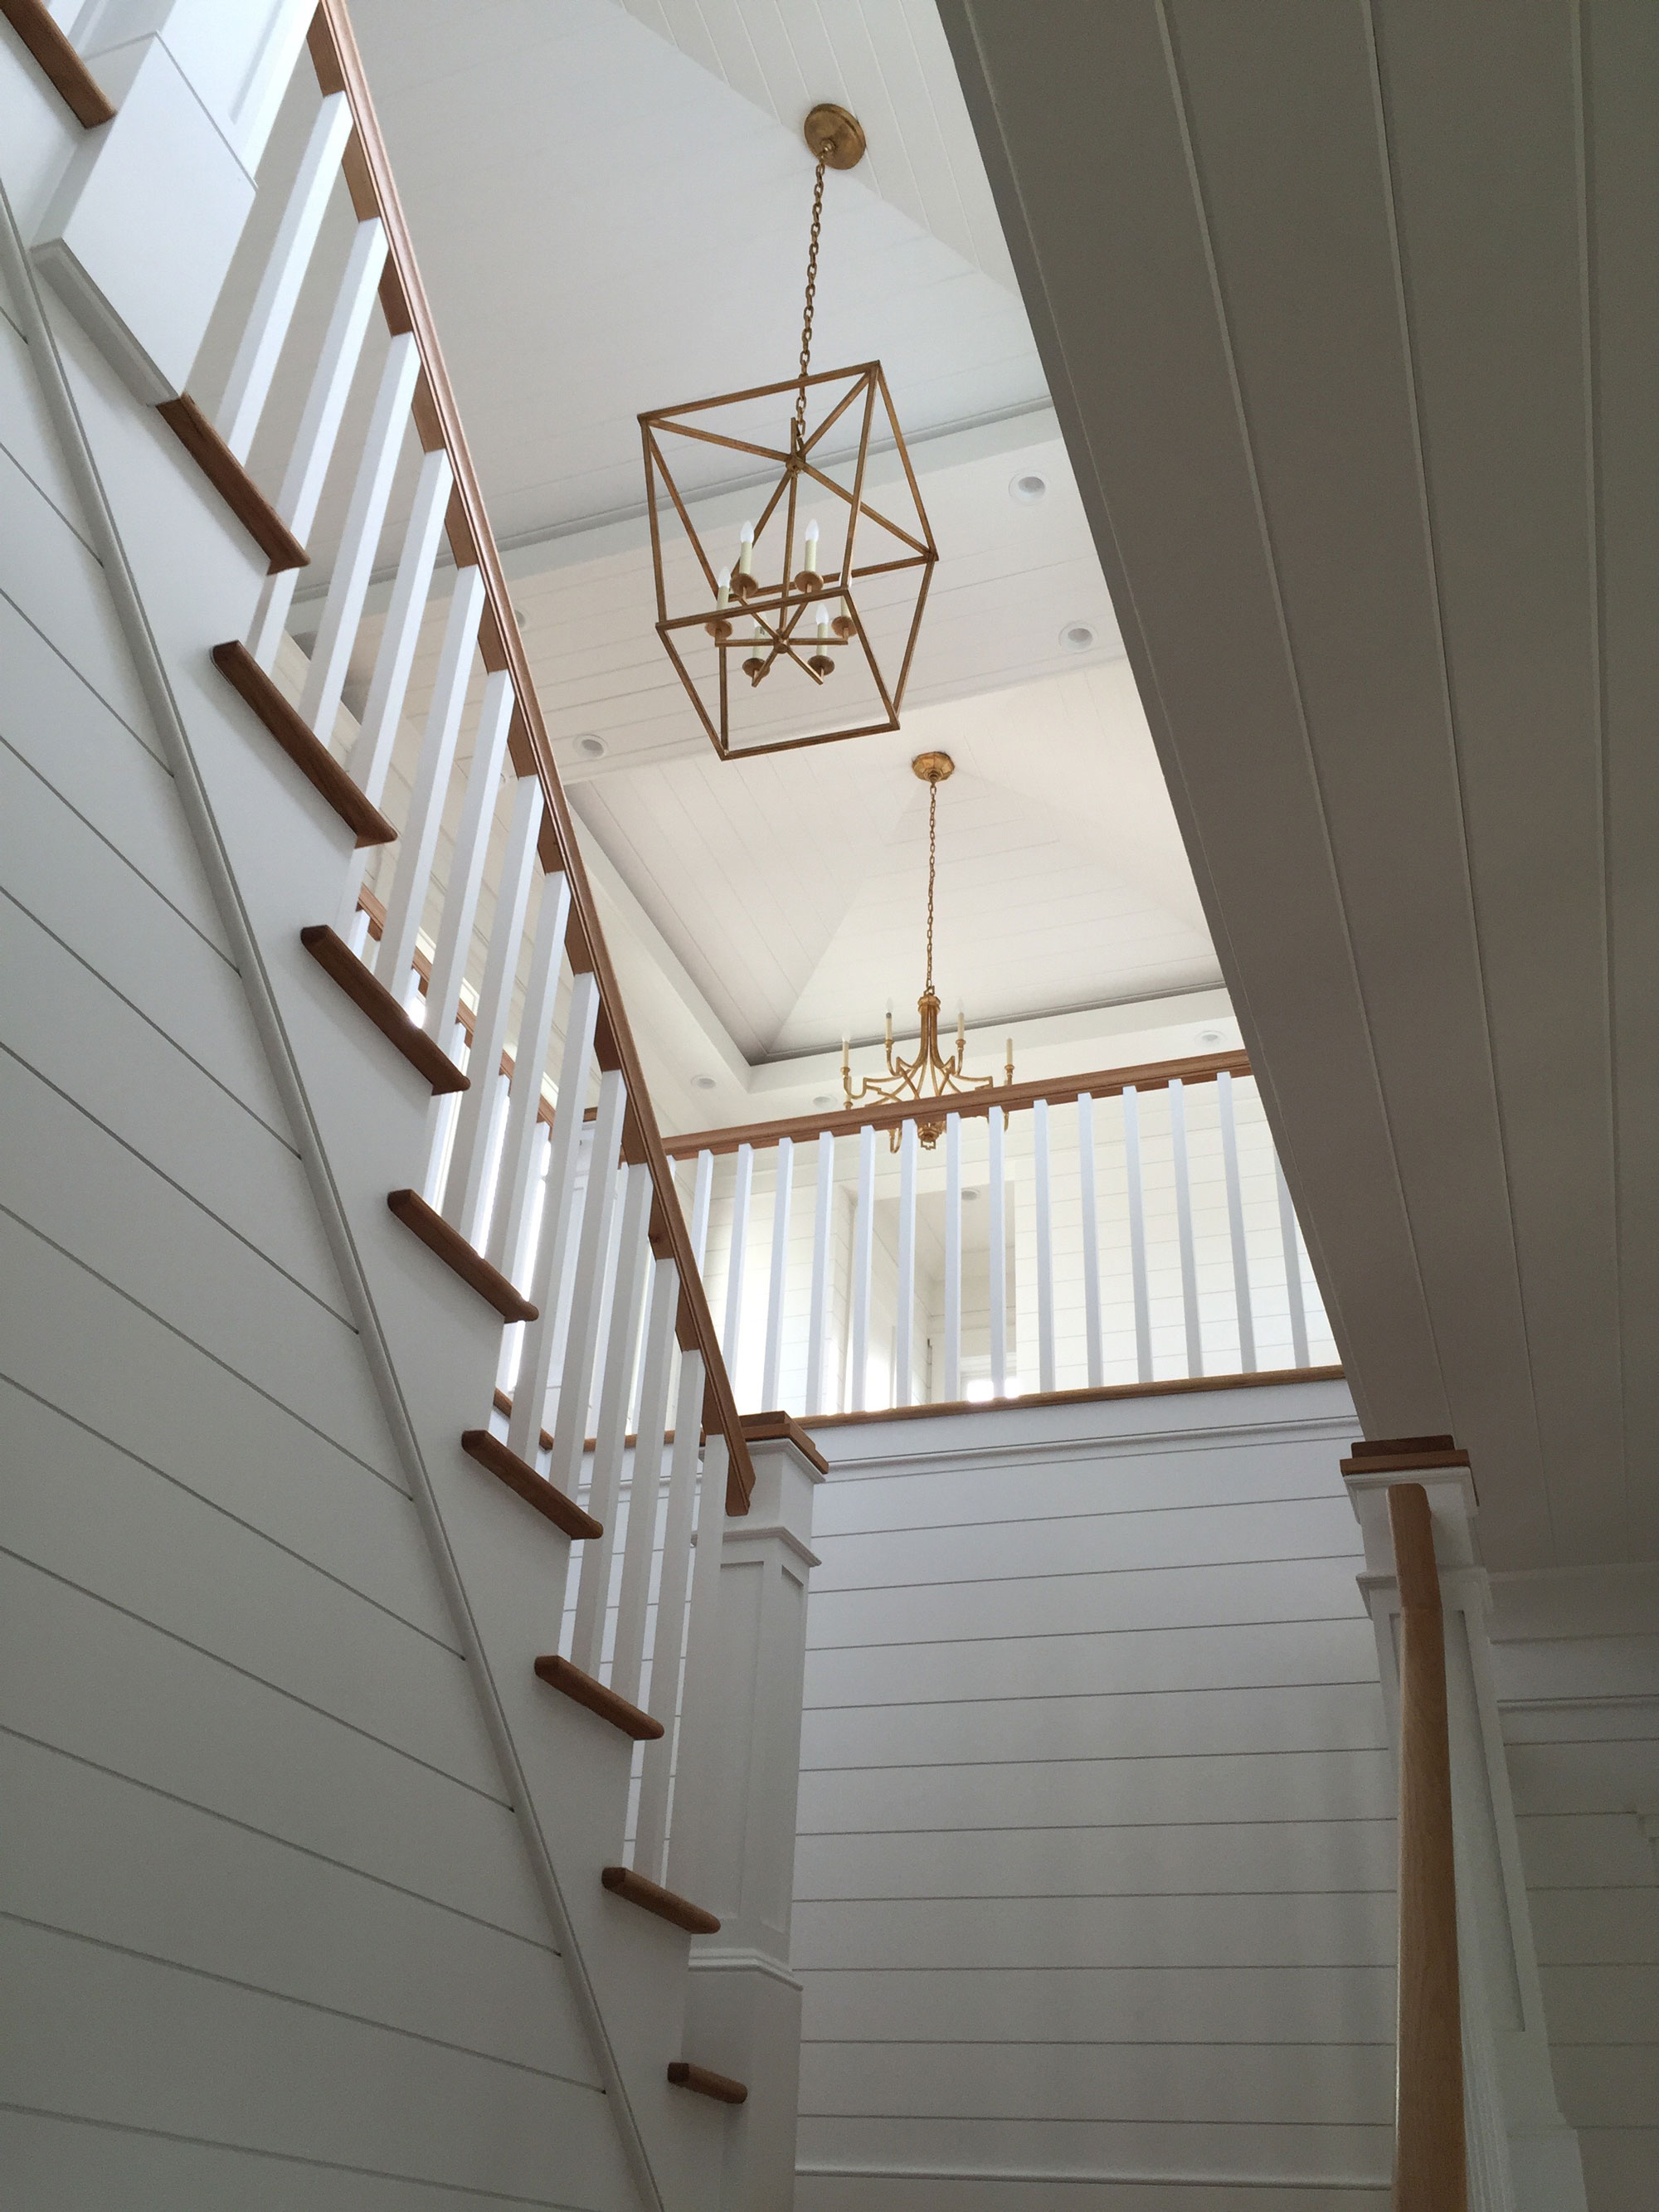 Cathedral ceiling in the stairwell of this new build coastal home